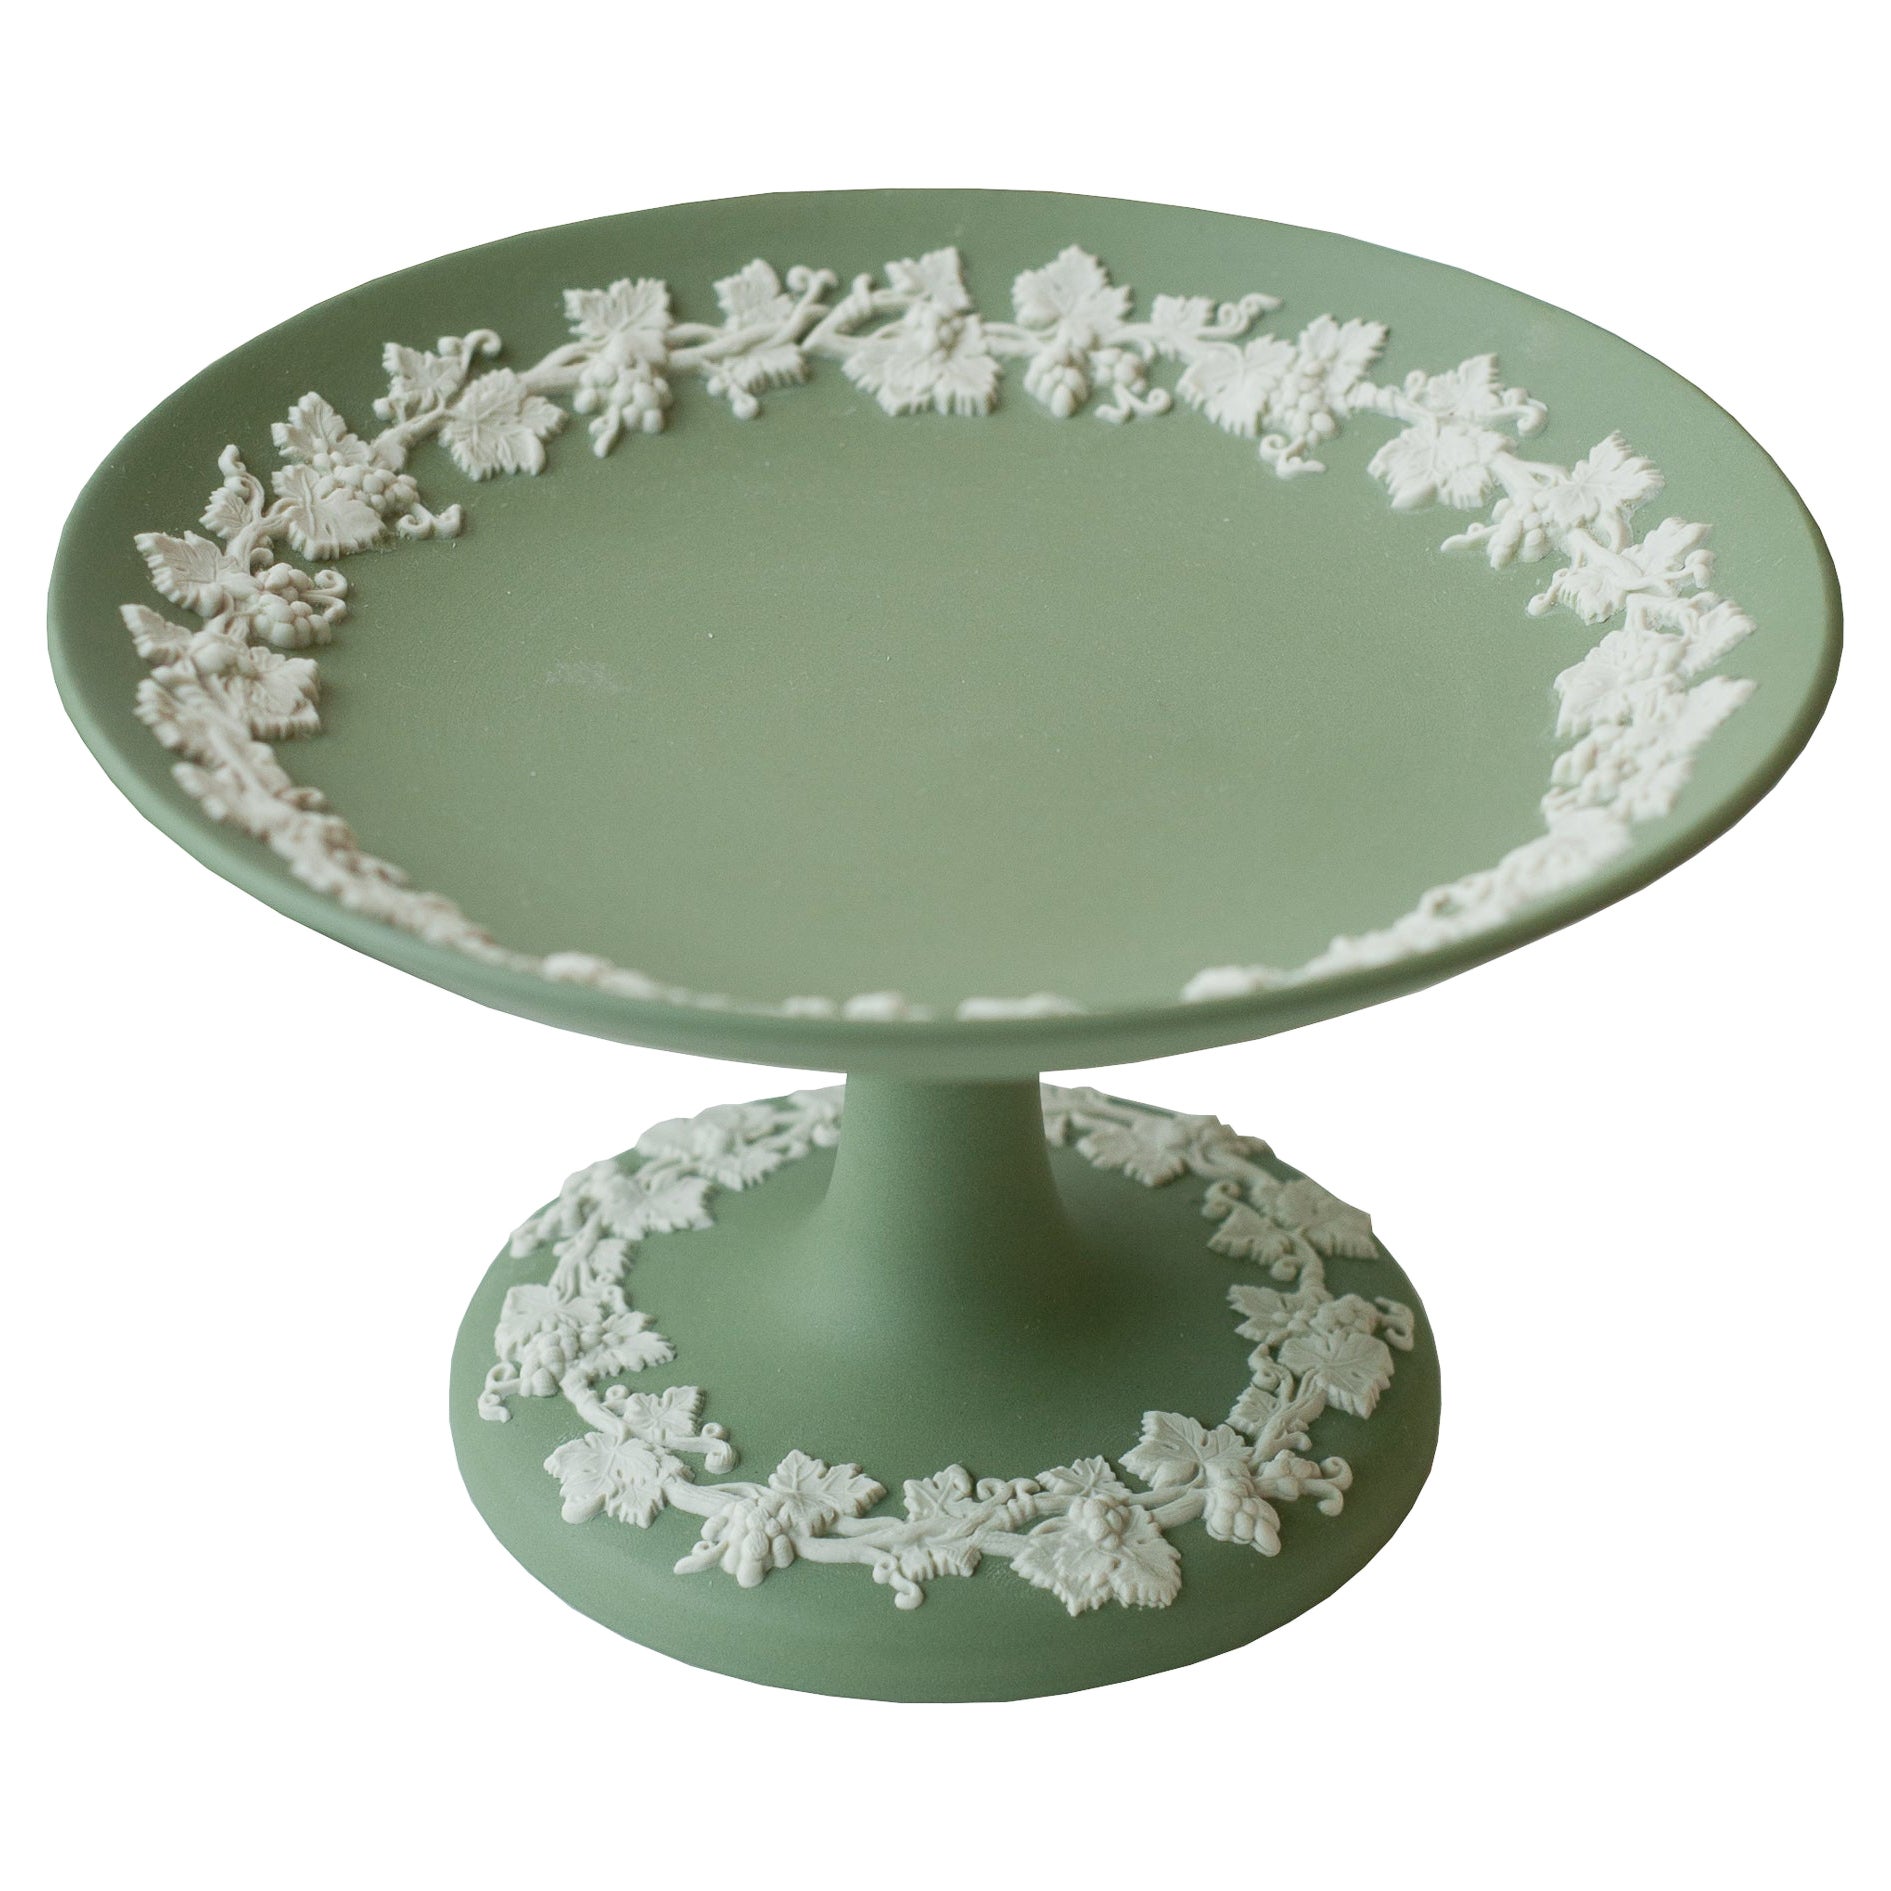 Antique Sage Green Wedgwood Small Tazza with White Overlay